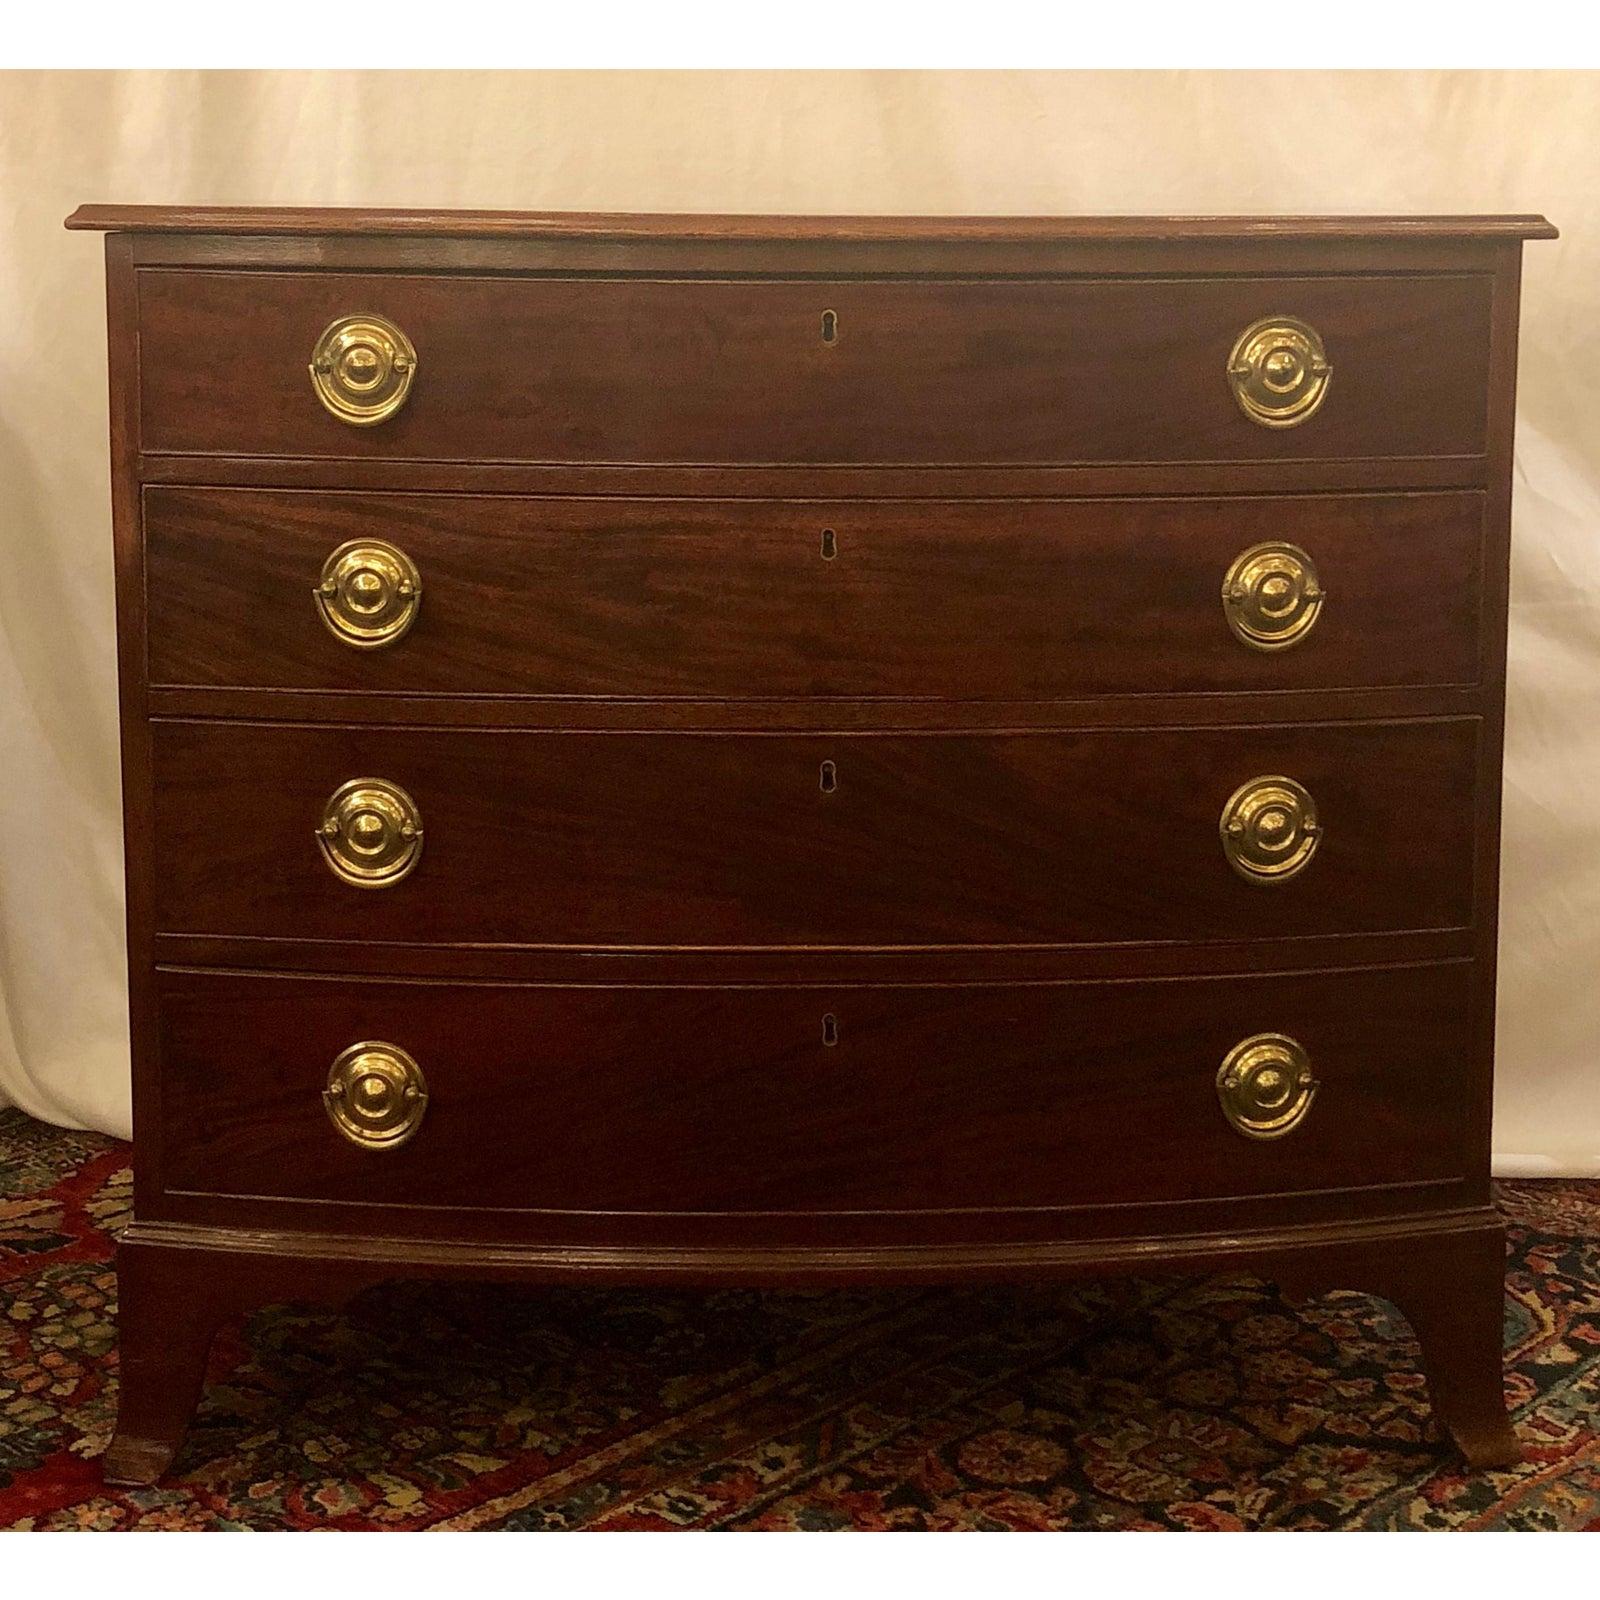 Antique American 18th Century Mahogany Bow-Front Chest of Drawers, circa 1780 For Sale 1